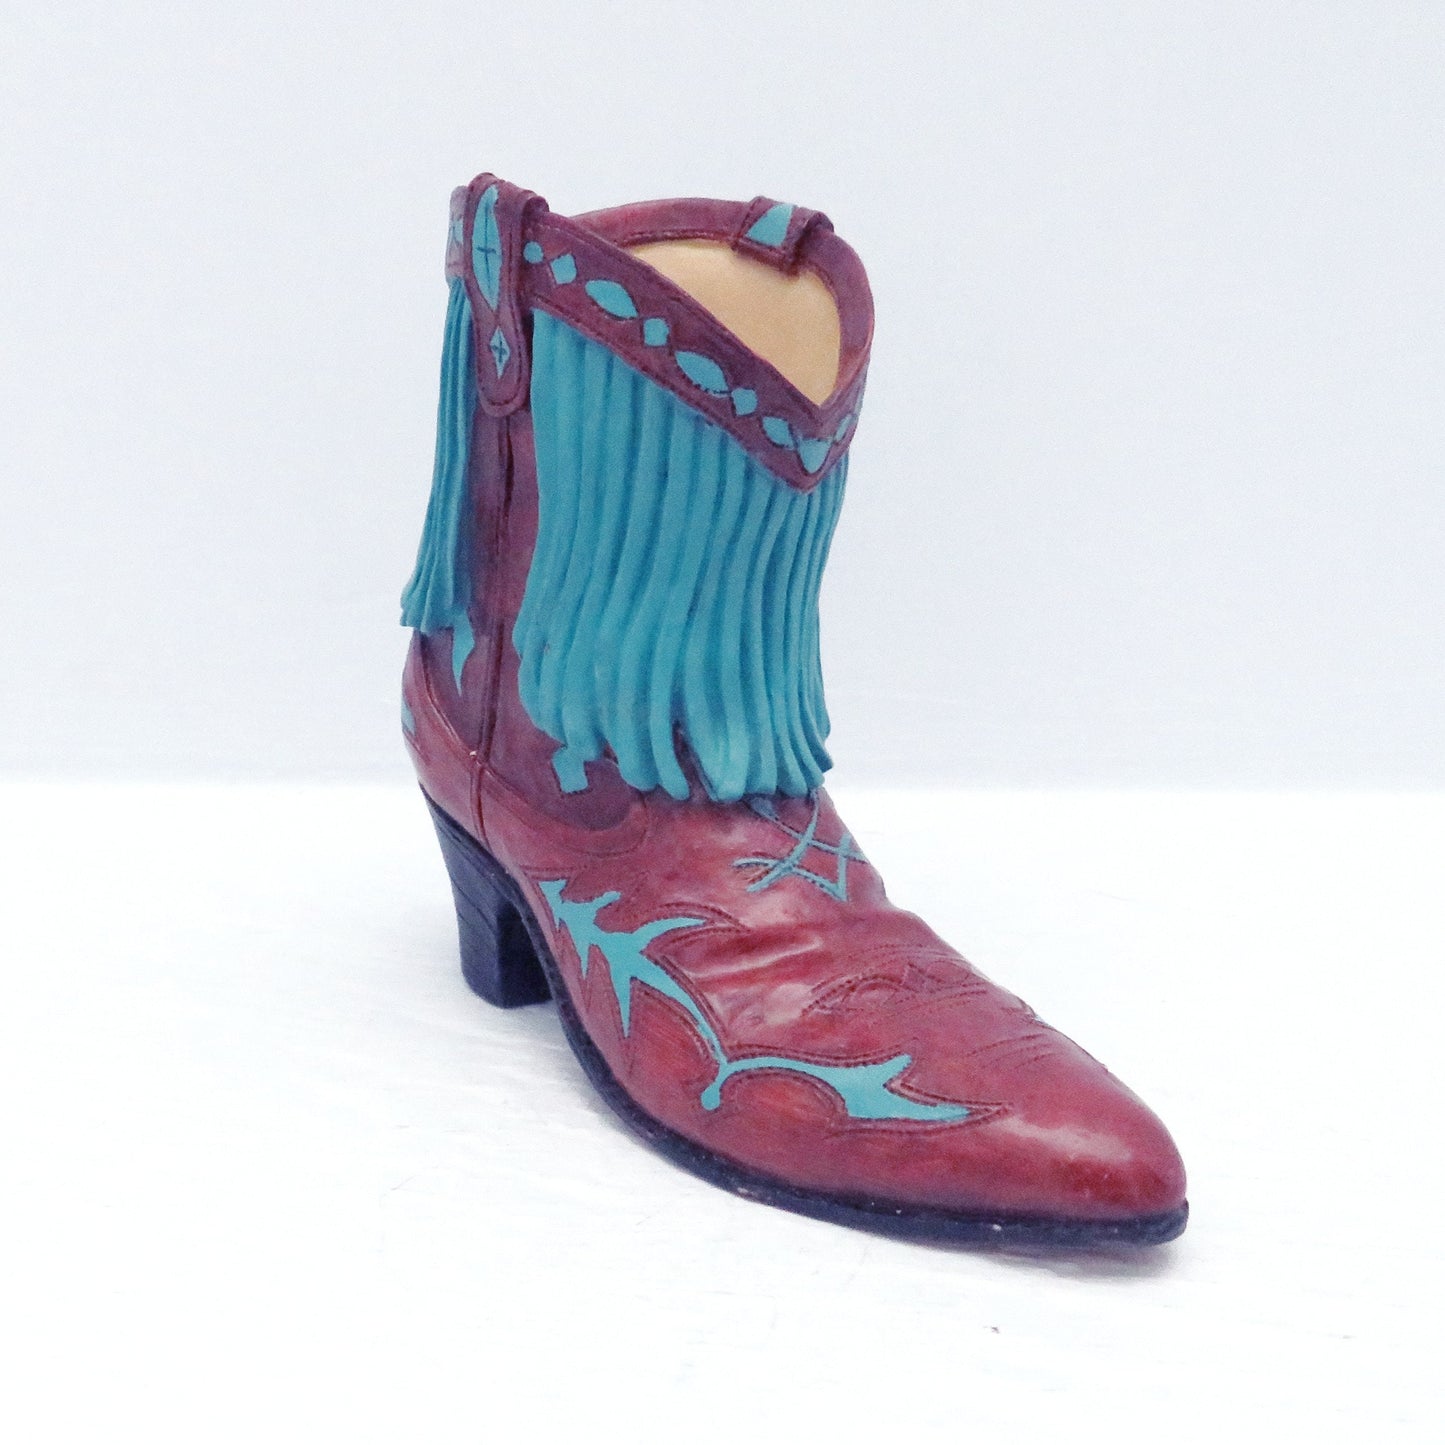 Vintage Resin Brown Cowboy Boot With Turquoise Fringe Figurine / Cowboy Decor / Western Decor / Cowboy Boot Lover Gift /